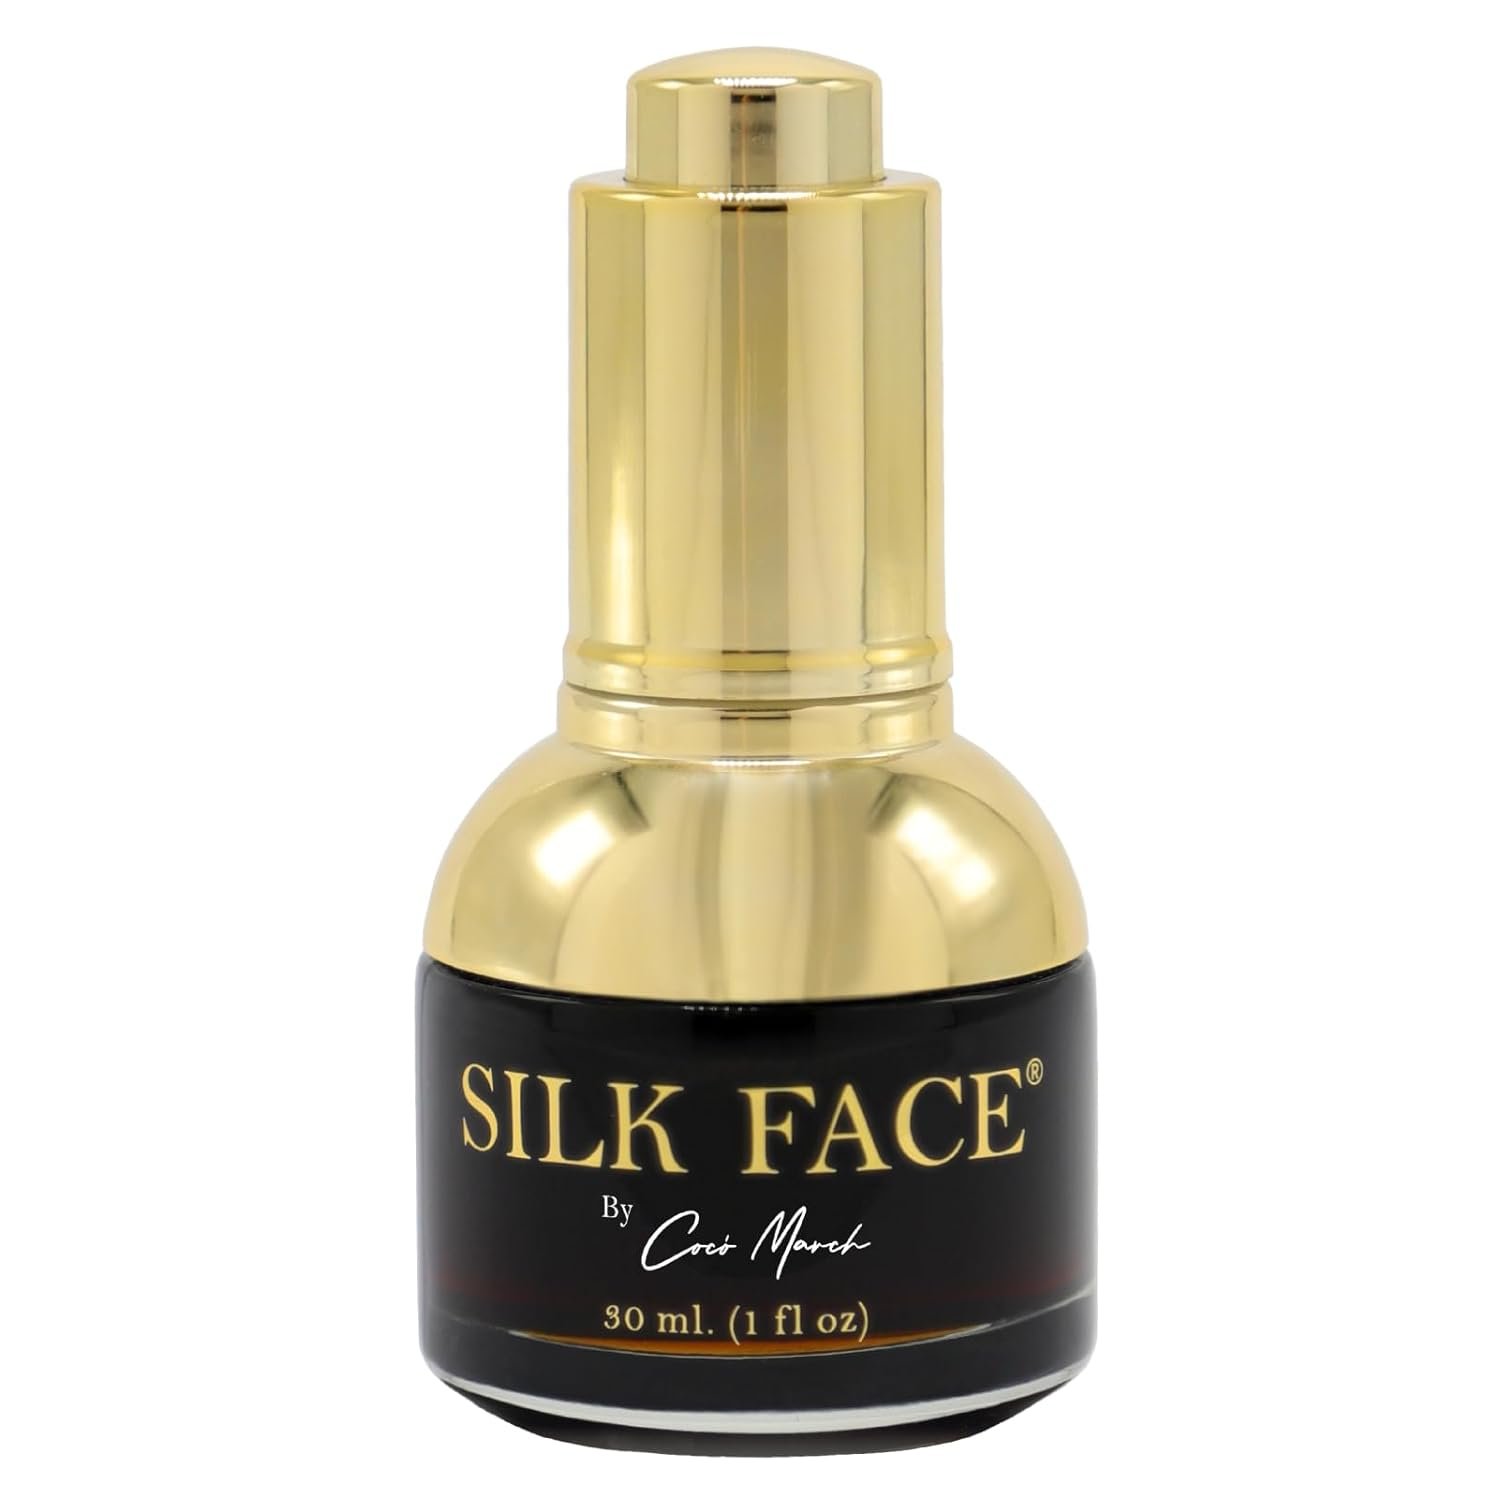 Elixir SILK FACE Serum by Coco March - PURE SILK Extracts - Quickly Reduces Fine Lines - Evens out Skin Tone, Luxurious Illumination Visible from the first application 1 fl oz.